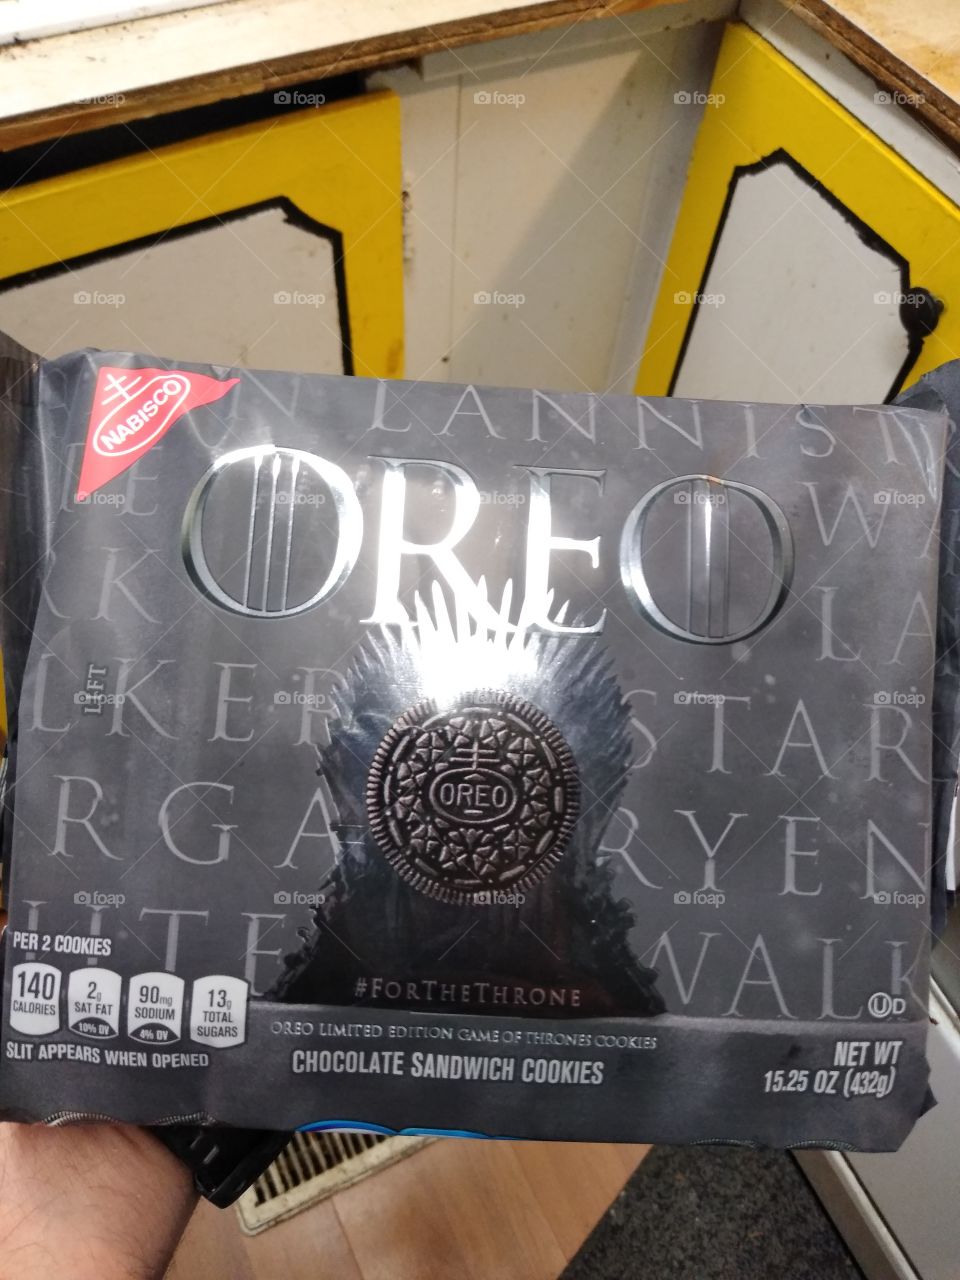 Game of thrones Oreo's limited edition